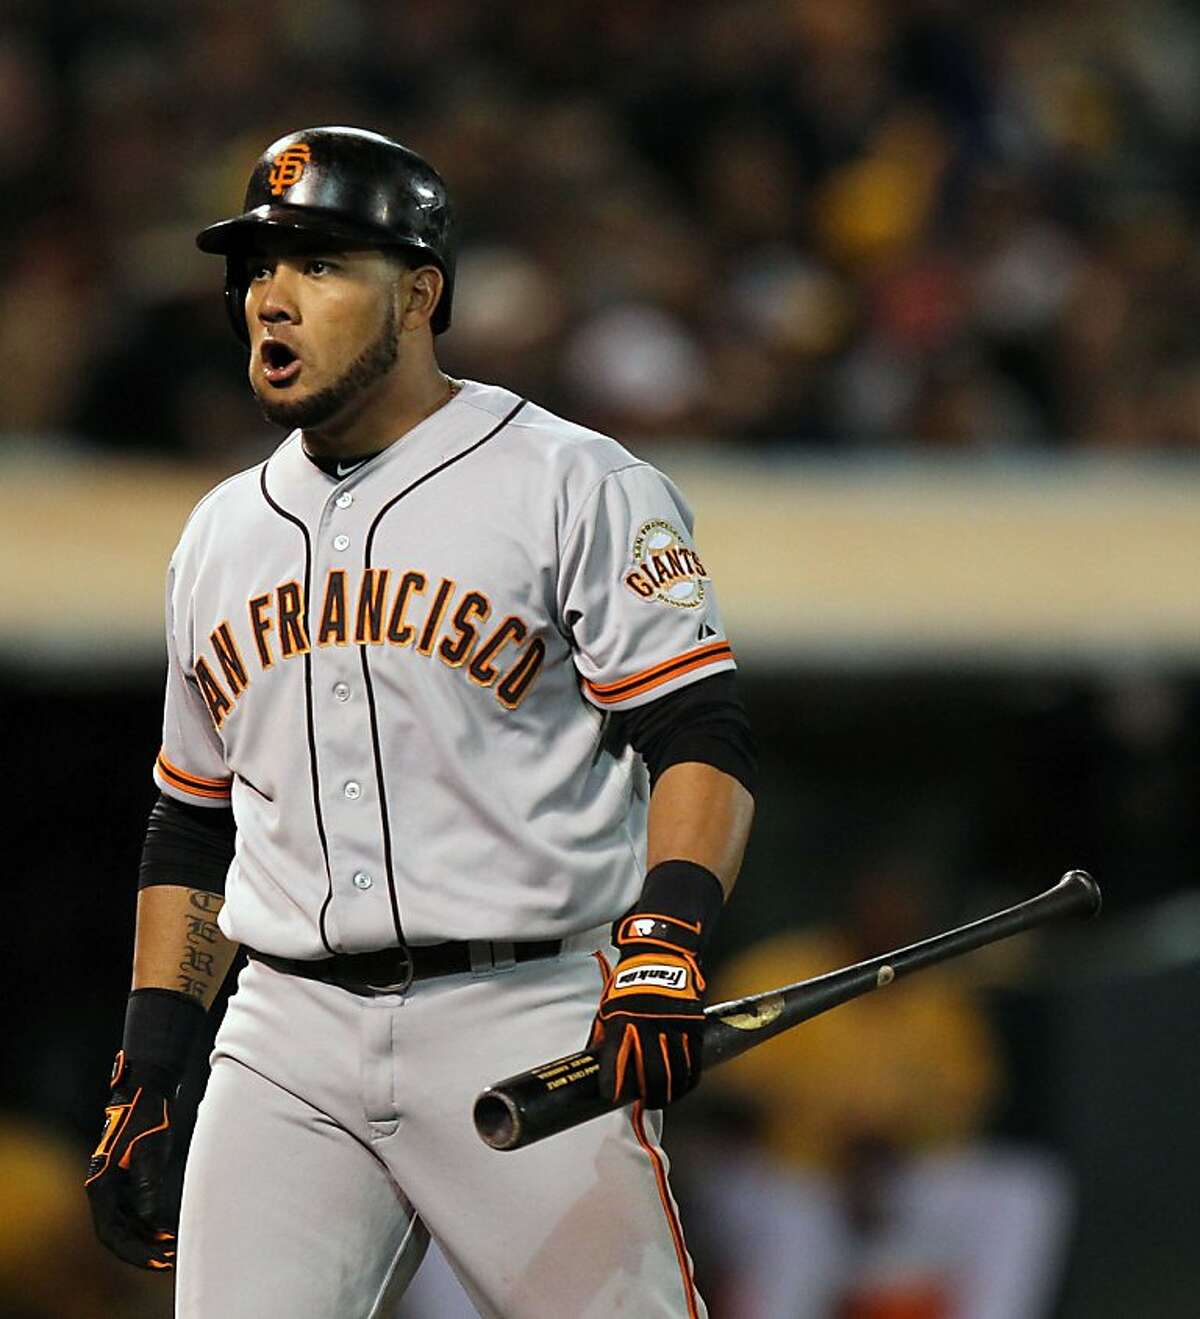 San Francisco Giants Melky Cabrera turns to the Giants dugout and voices his displeasure after striking out in the 8th inning against the Oakland Athletics during their MLB Baseball Game on Friday June 22, 2012 at the Oakland Coliseum, in Oakland California.